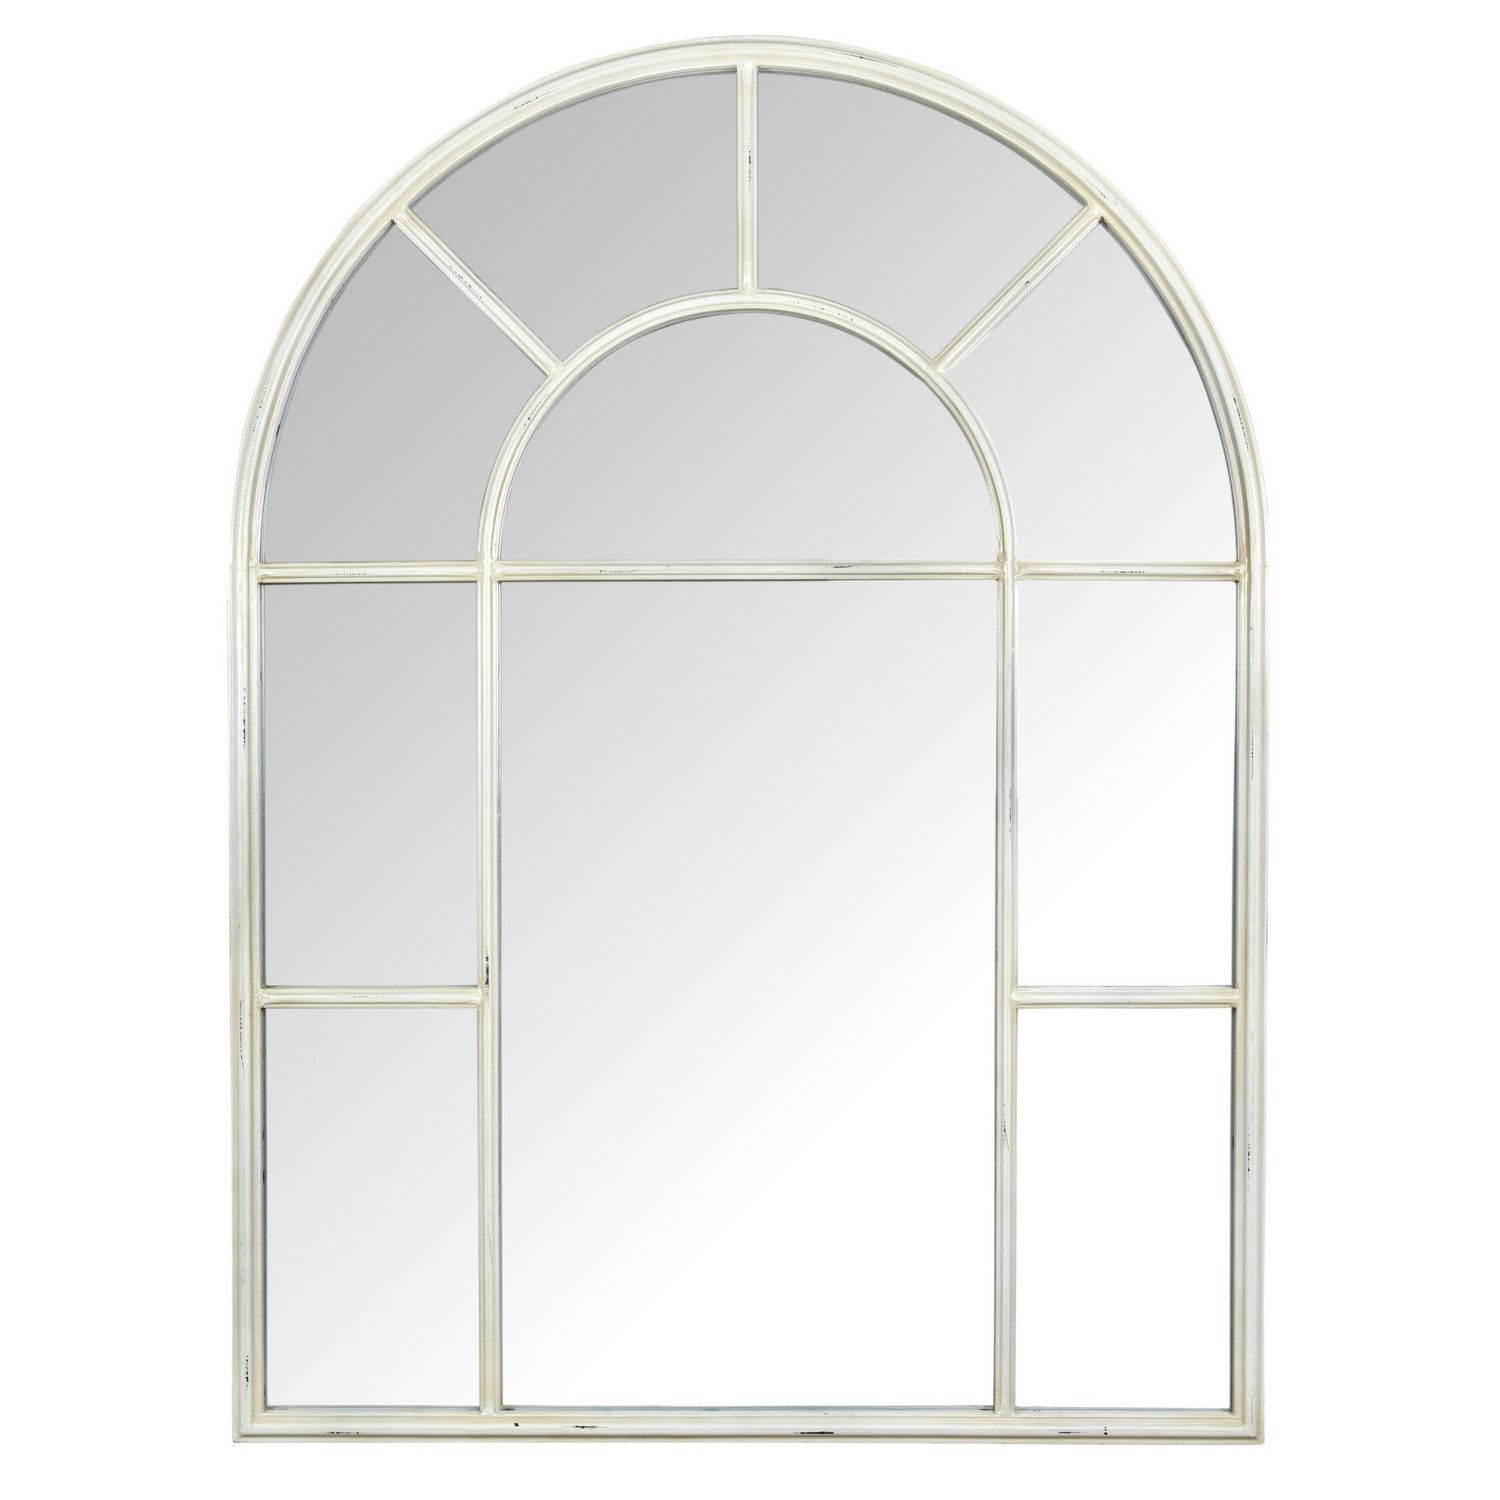 Most Recent Ivory Arch Mirror With Regard To Arched Wall Mirrors (View 3 of 20)